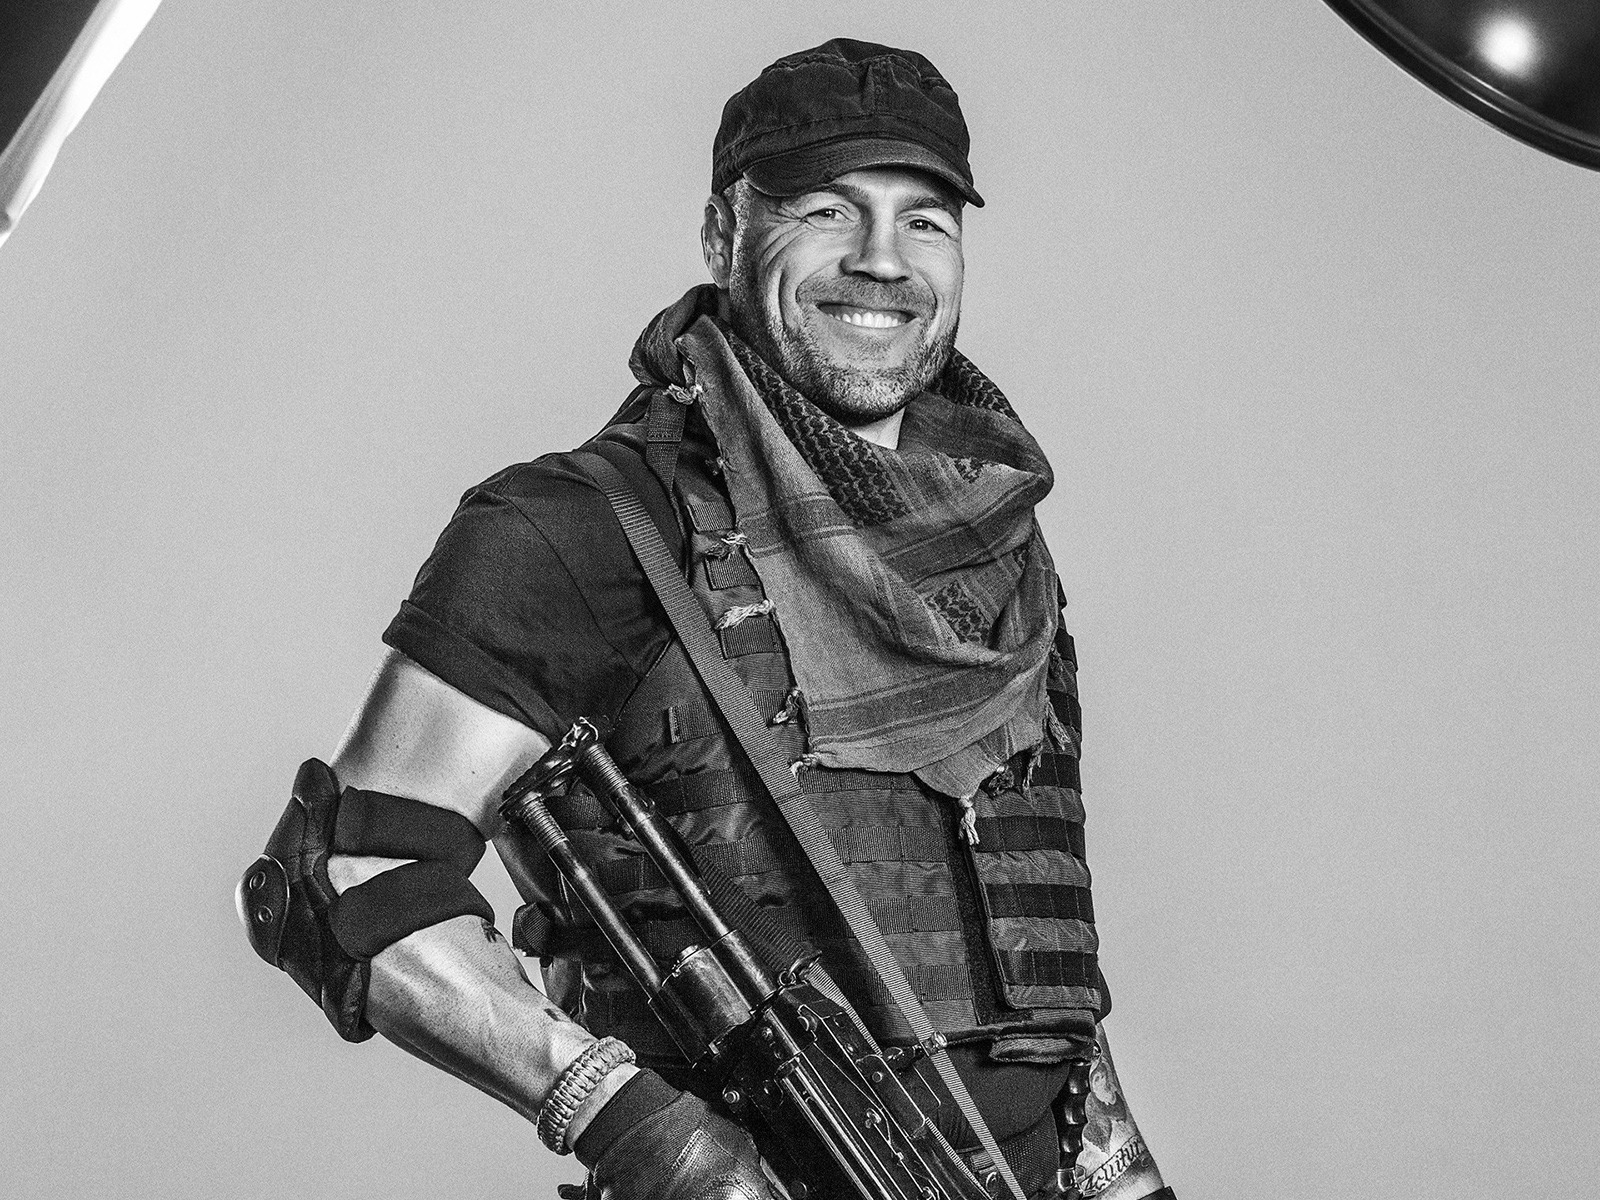 Randy Couture The Expendables 3 for 1600 x 1200 resolution